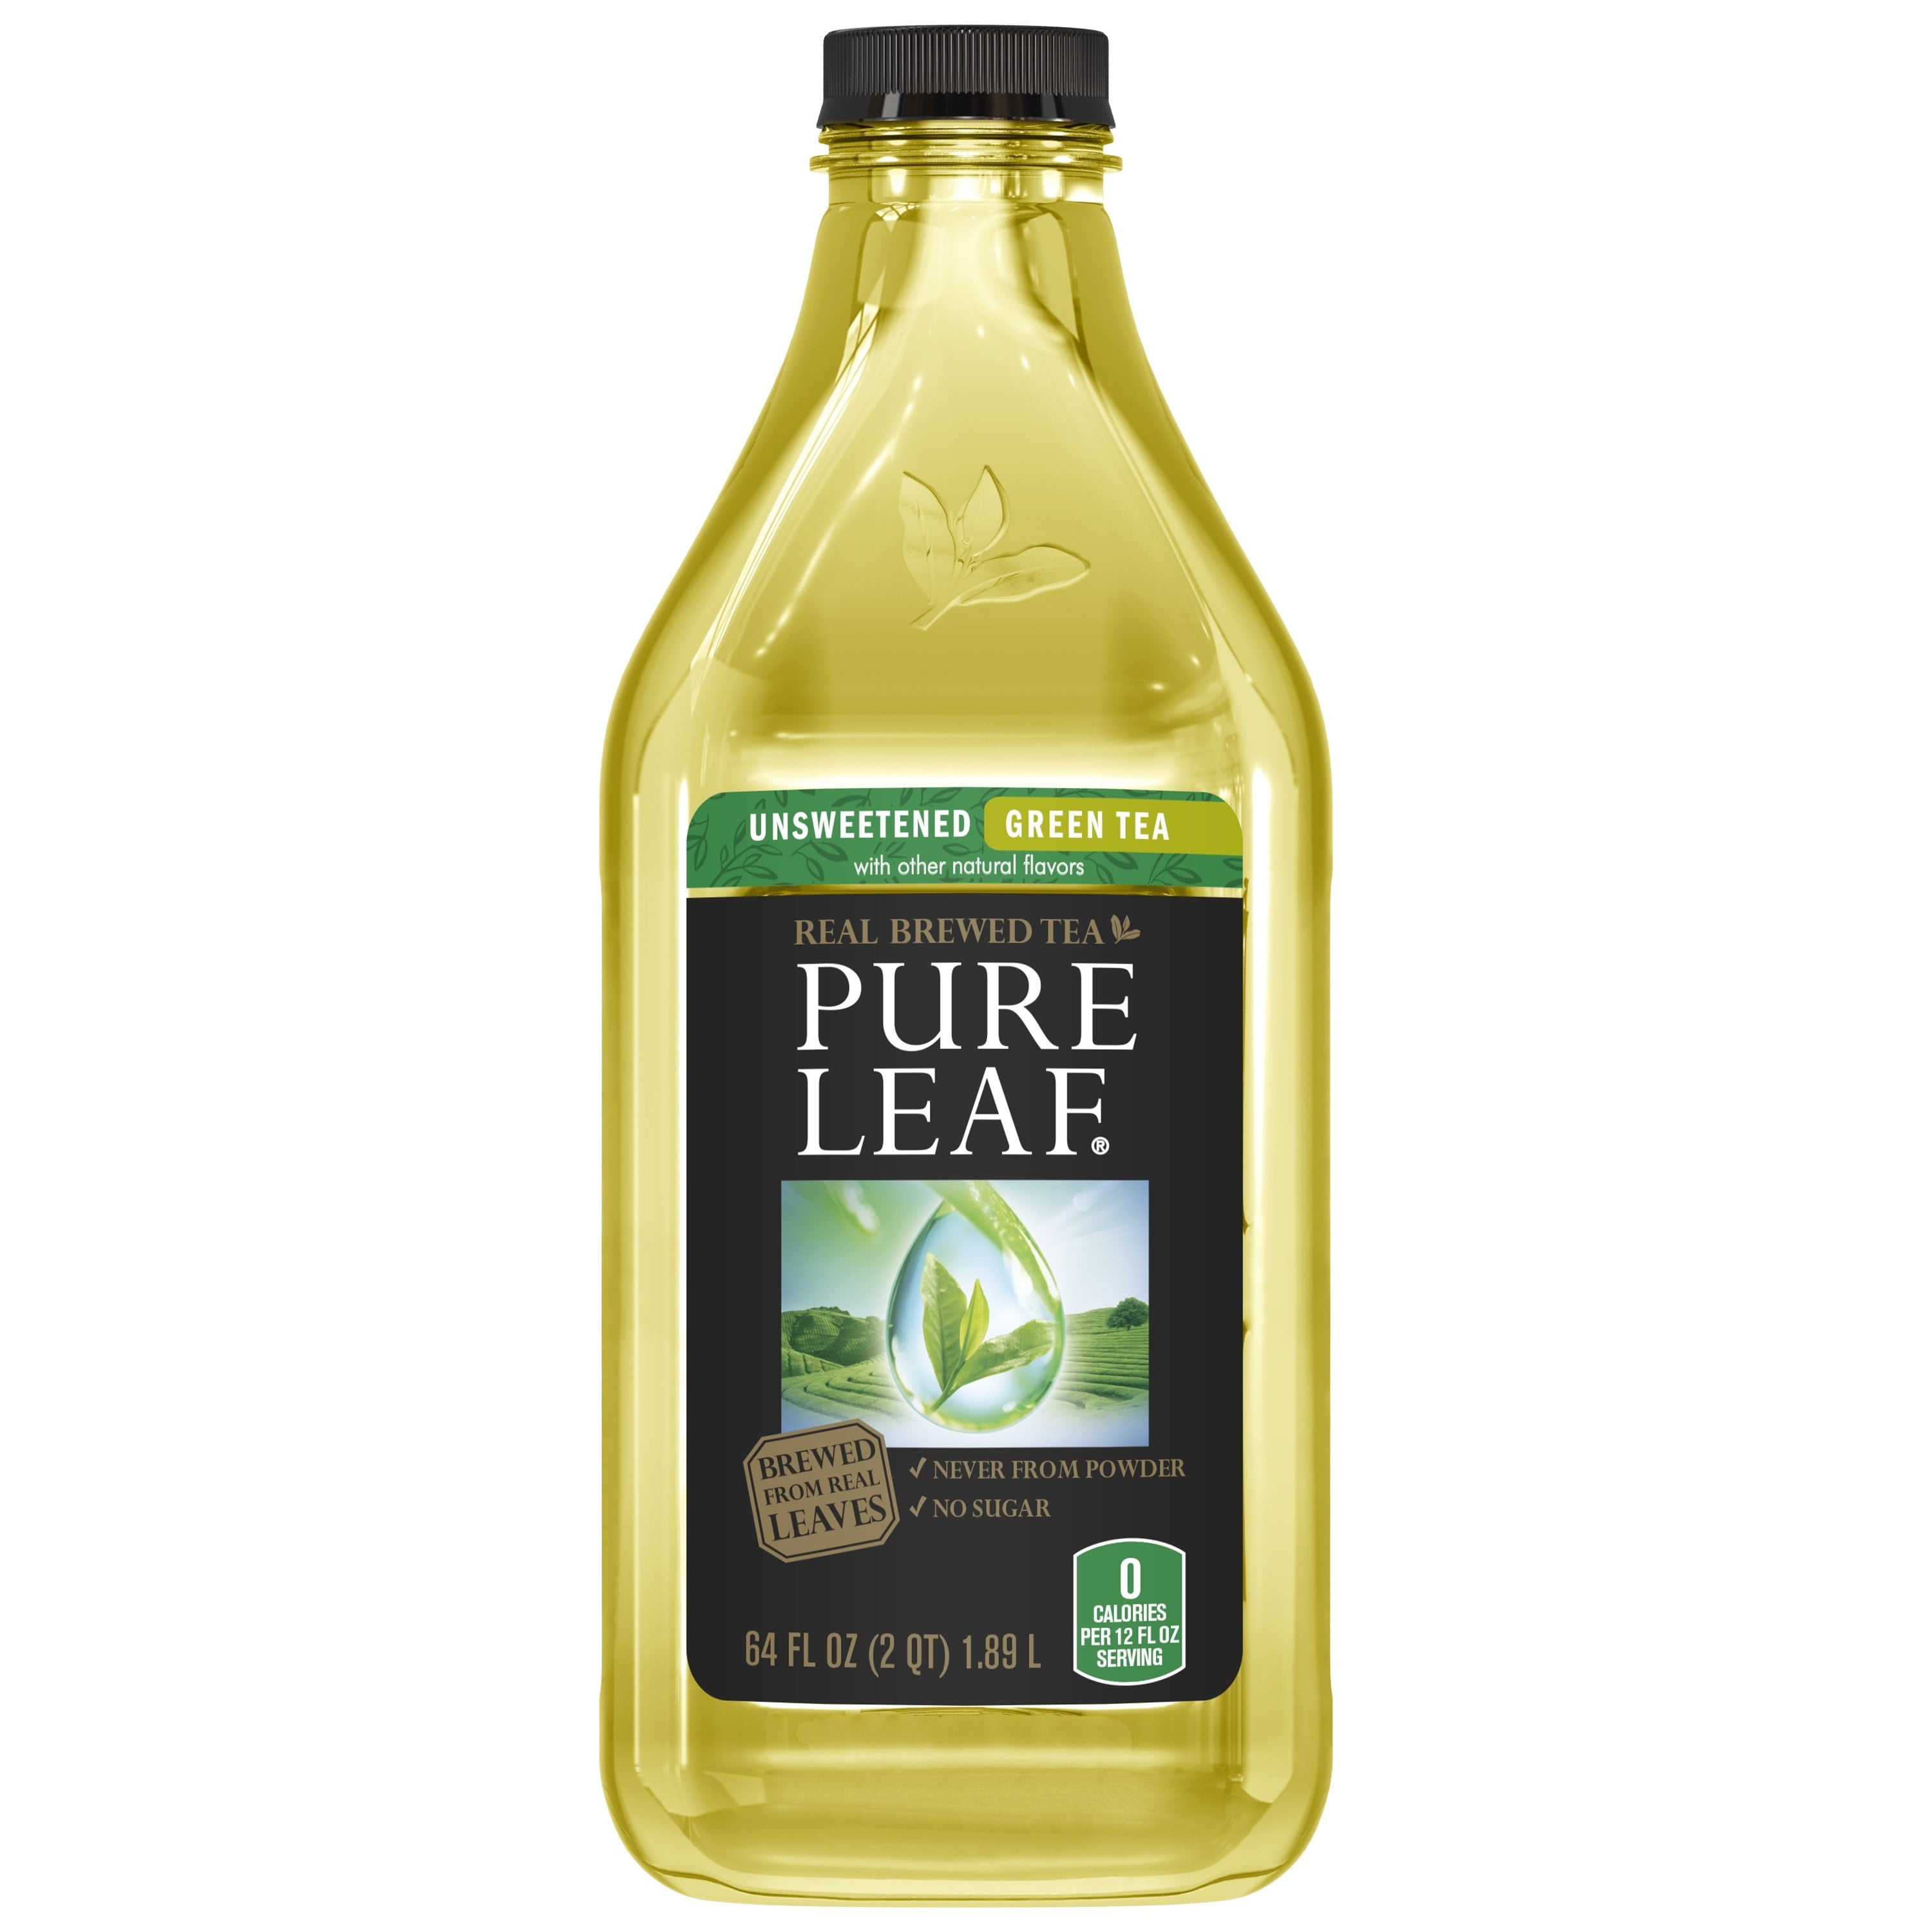 Image for PURE LEAF UNSWEETENED GREEN TEA.